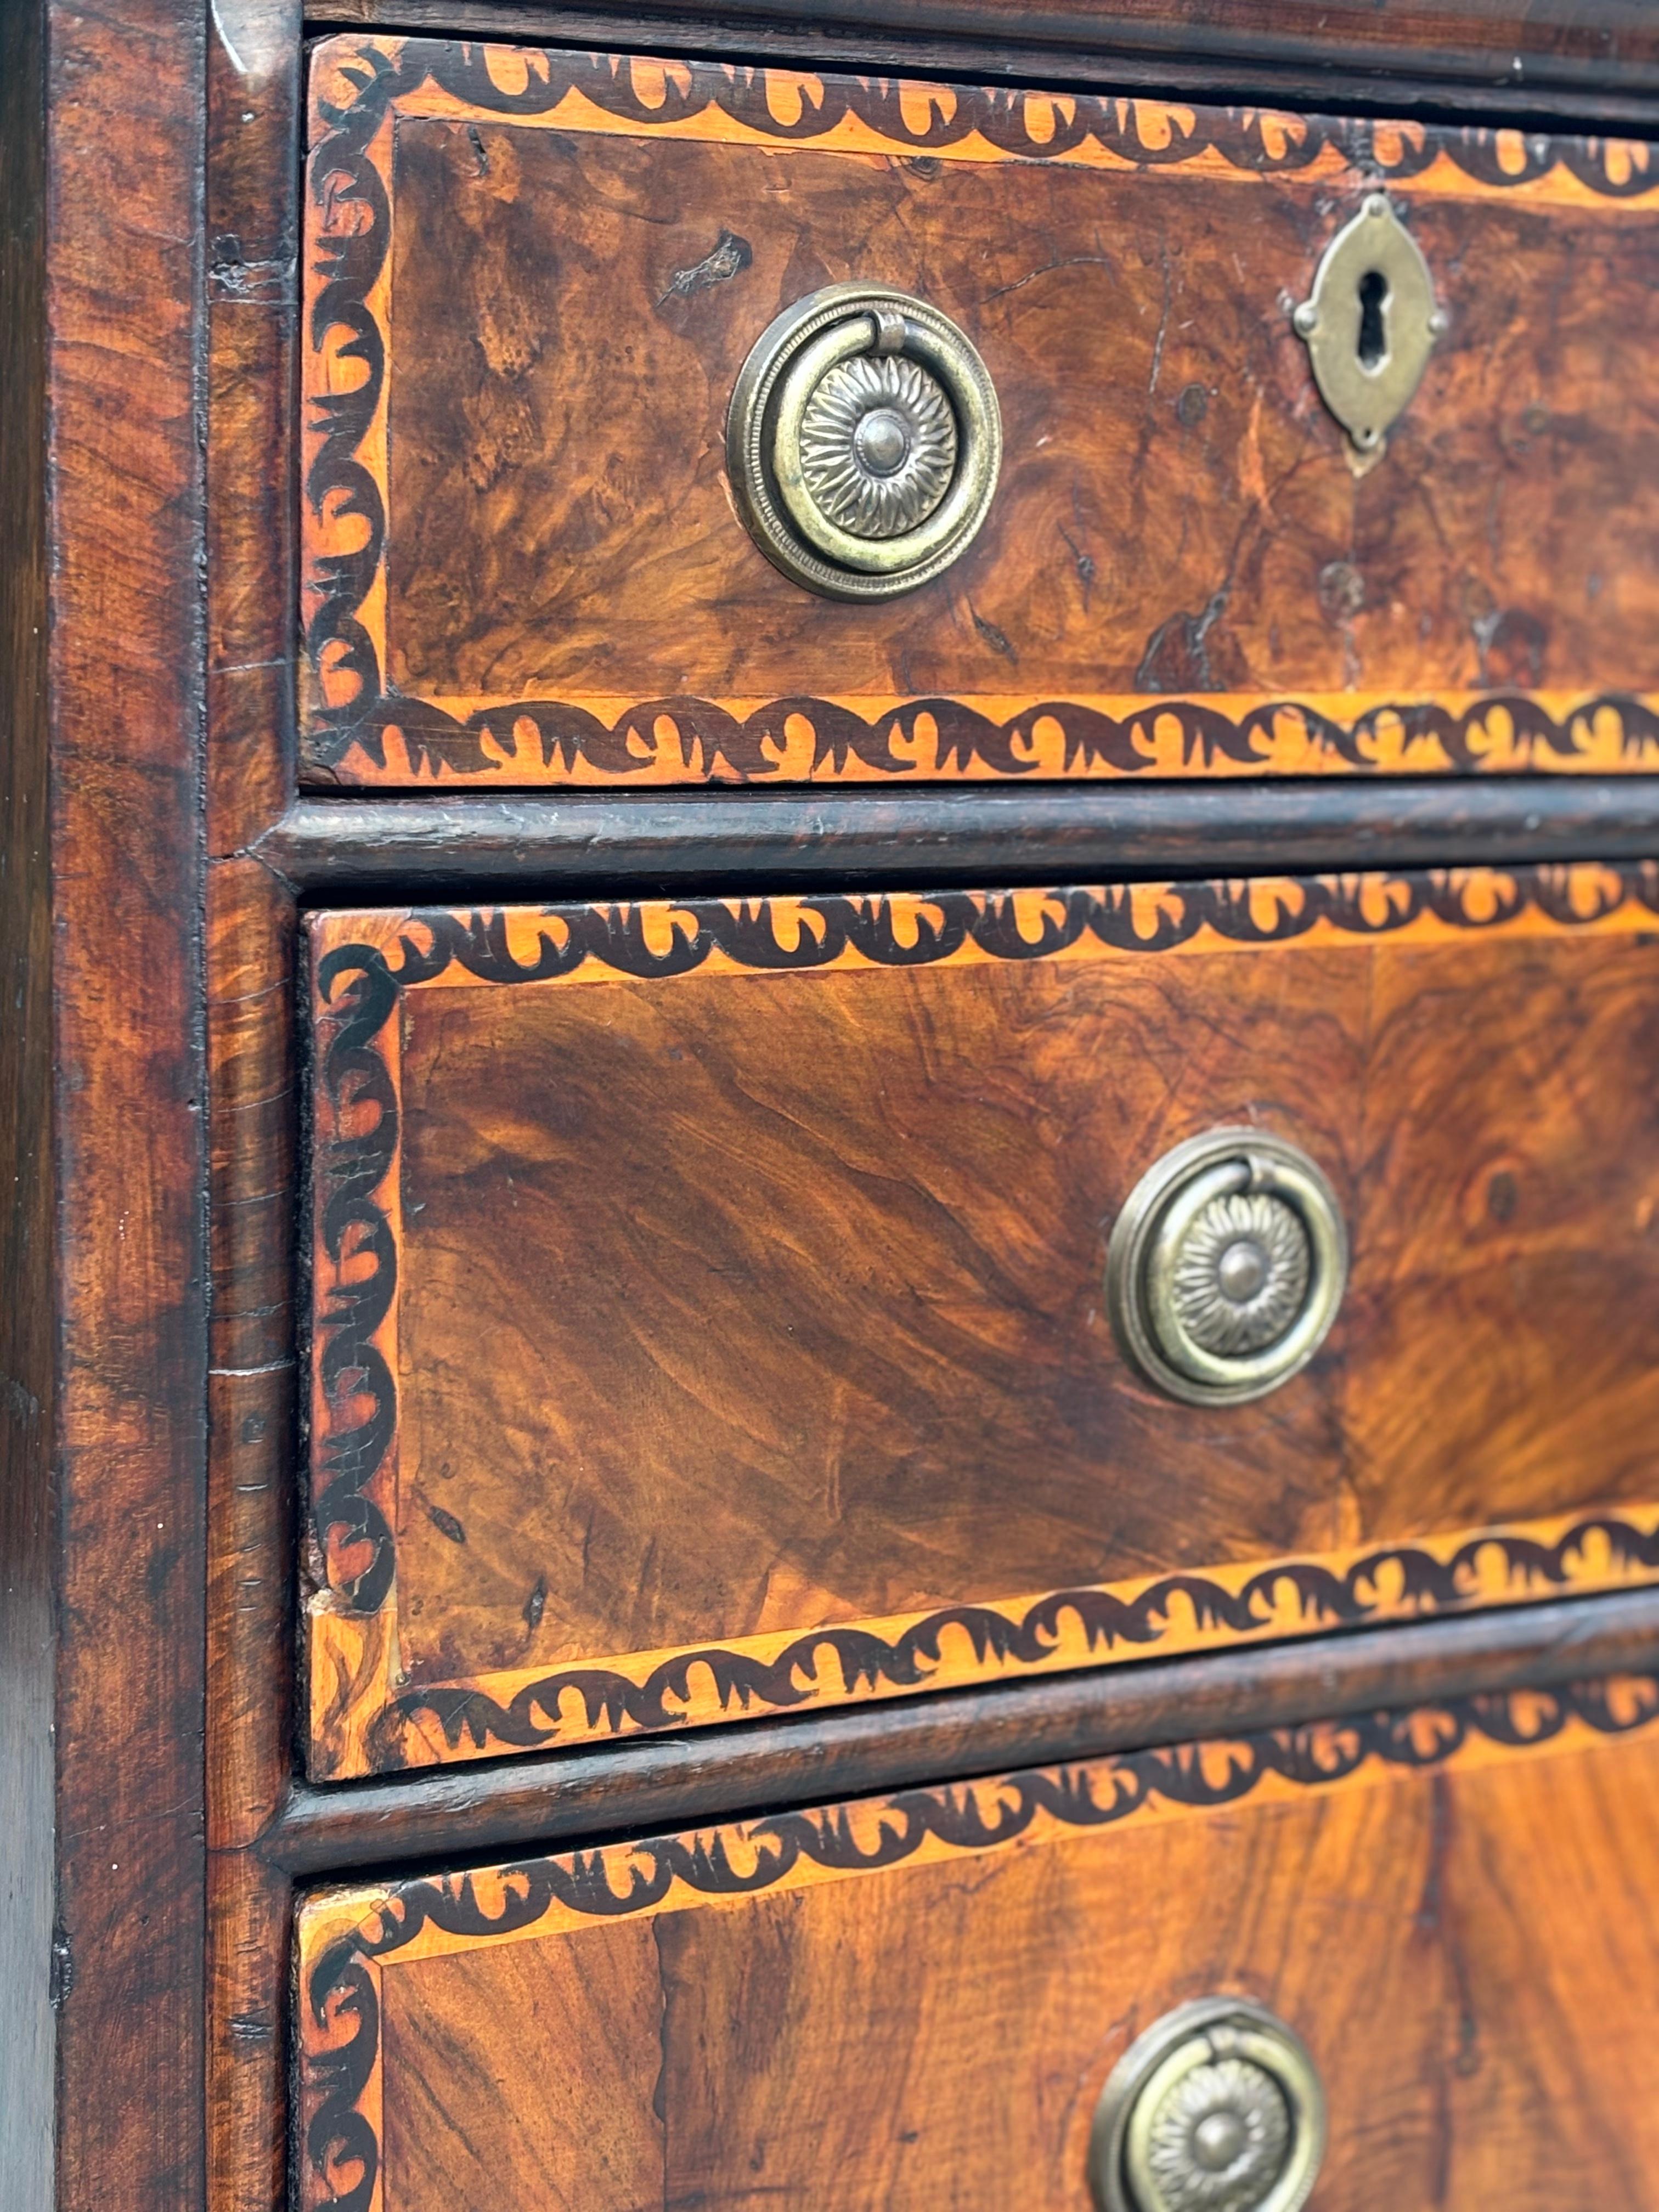 18th Century Walnut Chest of Drawers In Good Condition For Sale In Petworth,West Sussex, GB